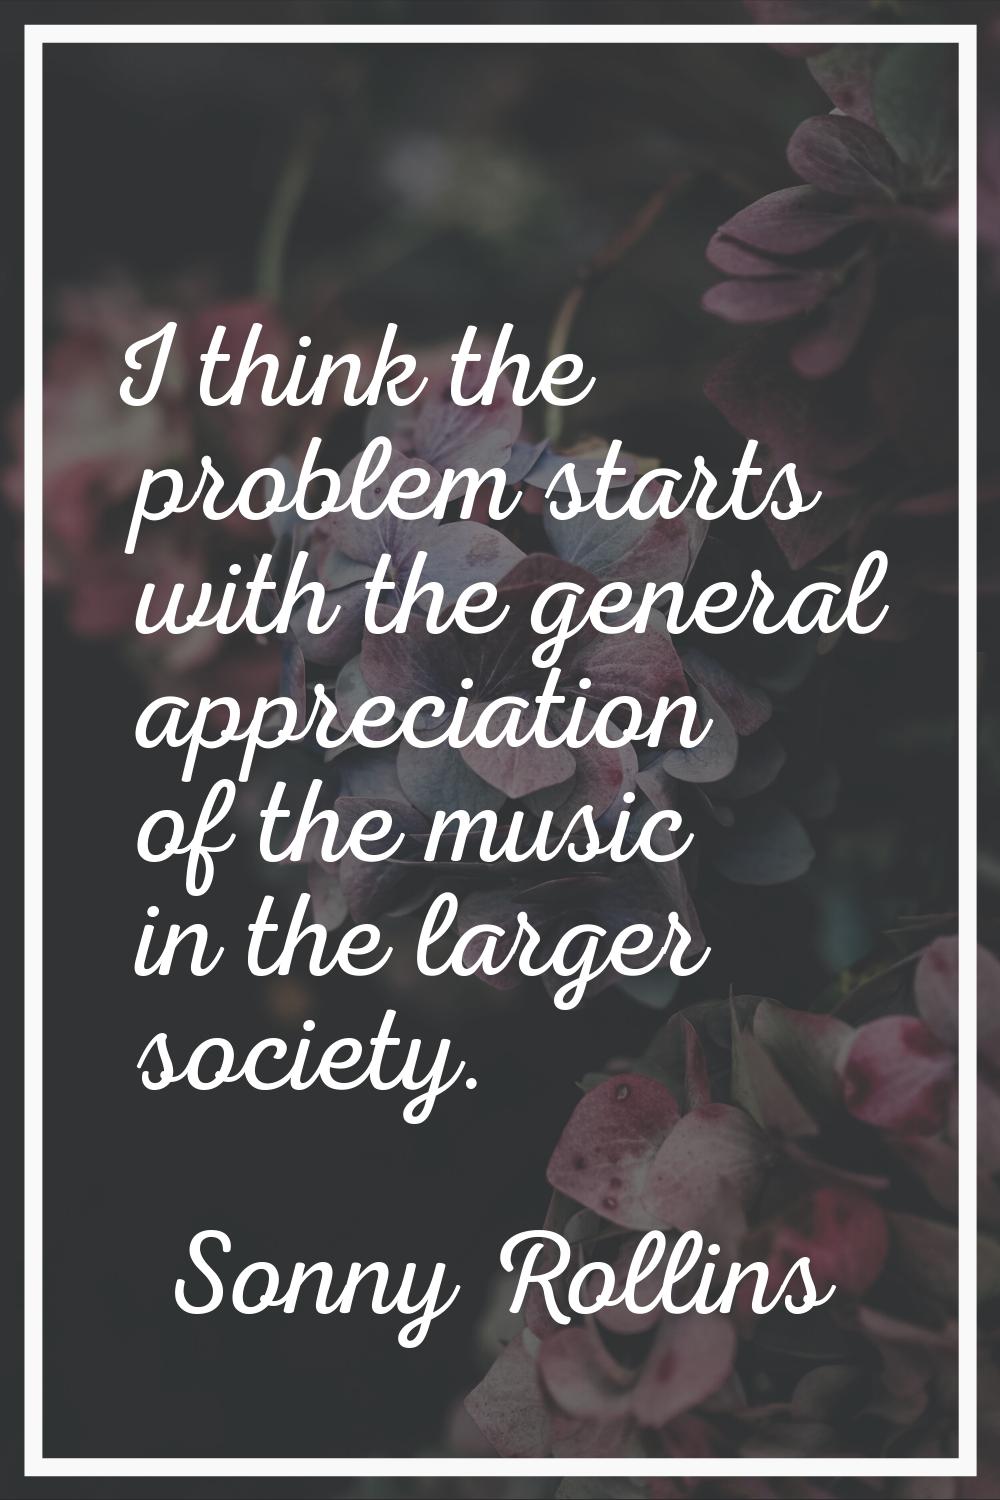 I think the problem starts with the general appreciation of the music in the larger society.